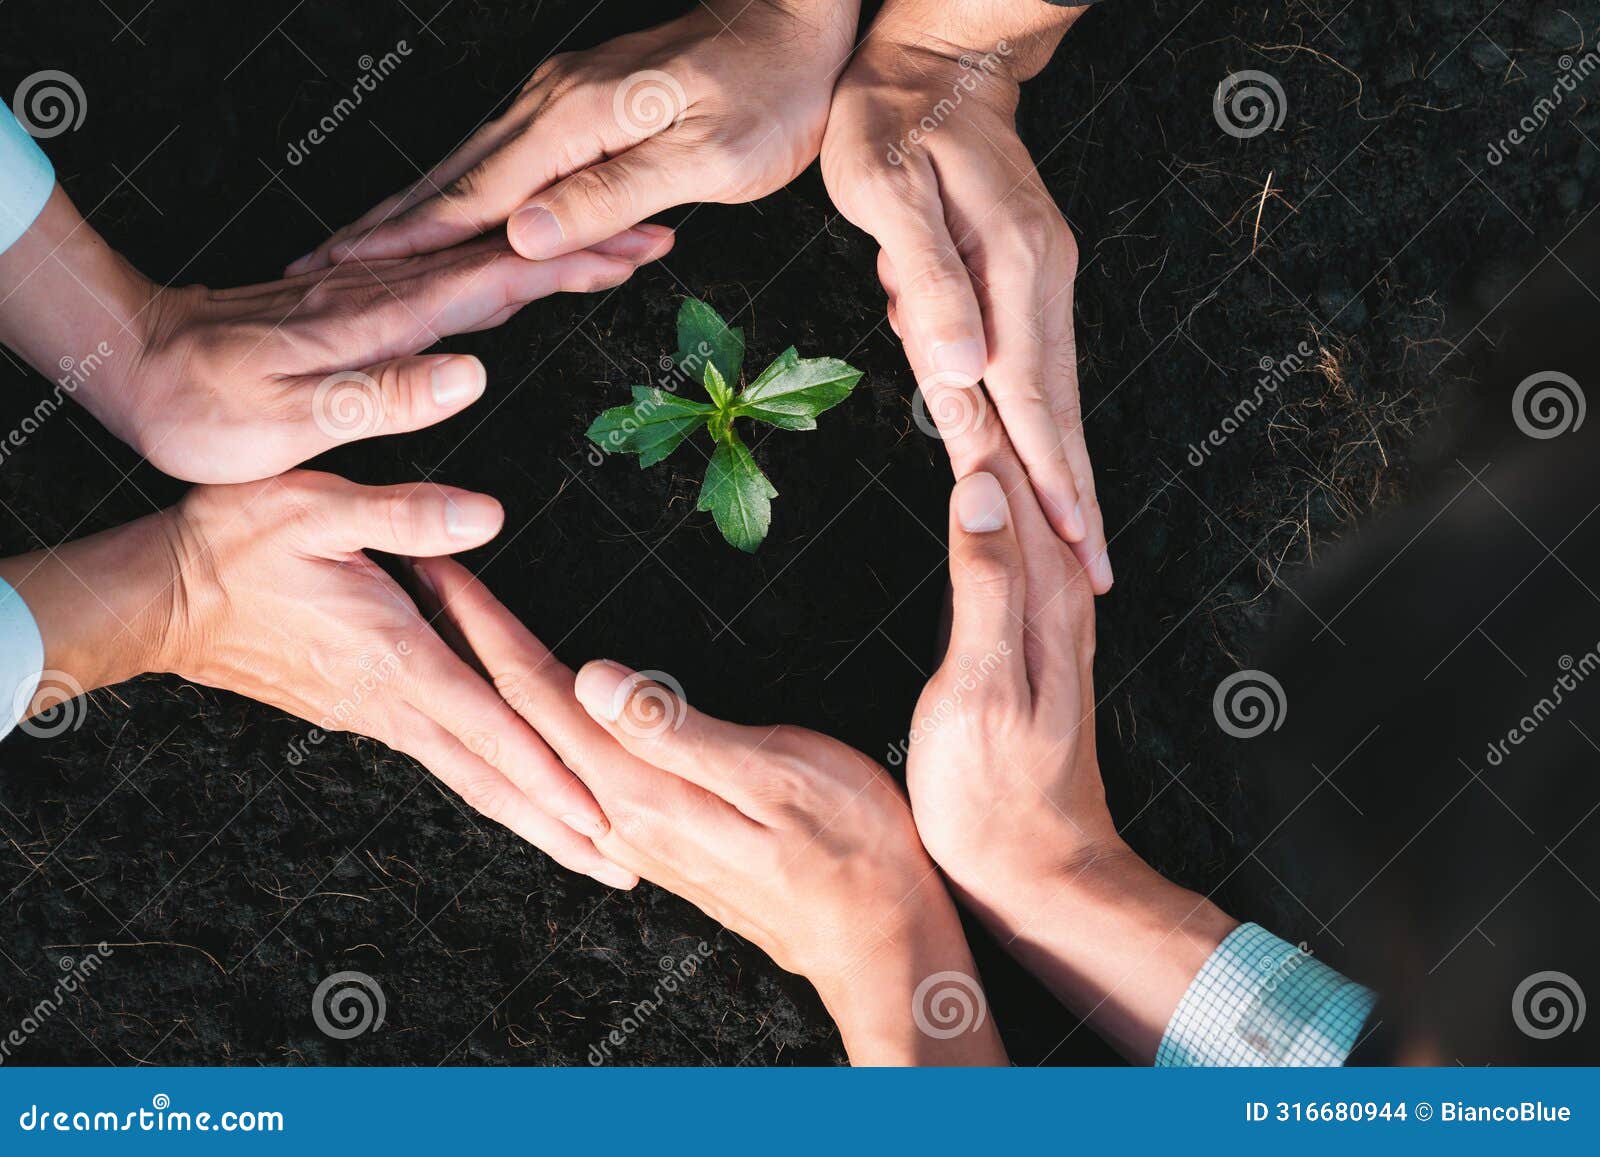 group of businesspeople hand grow and nurture plant together. gyre